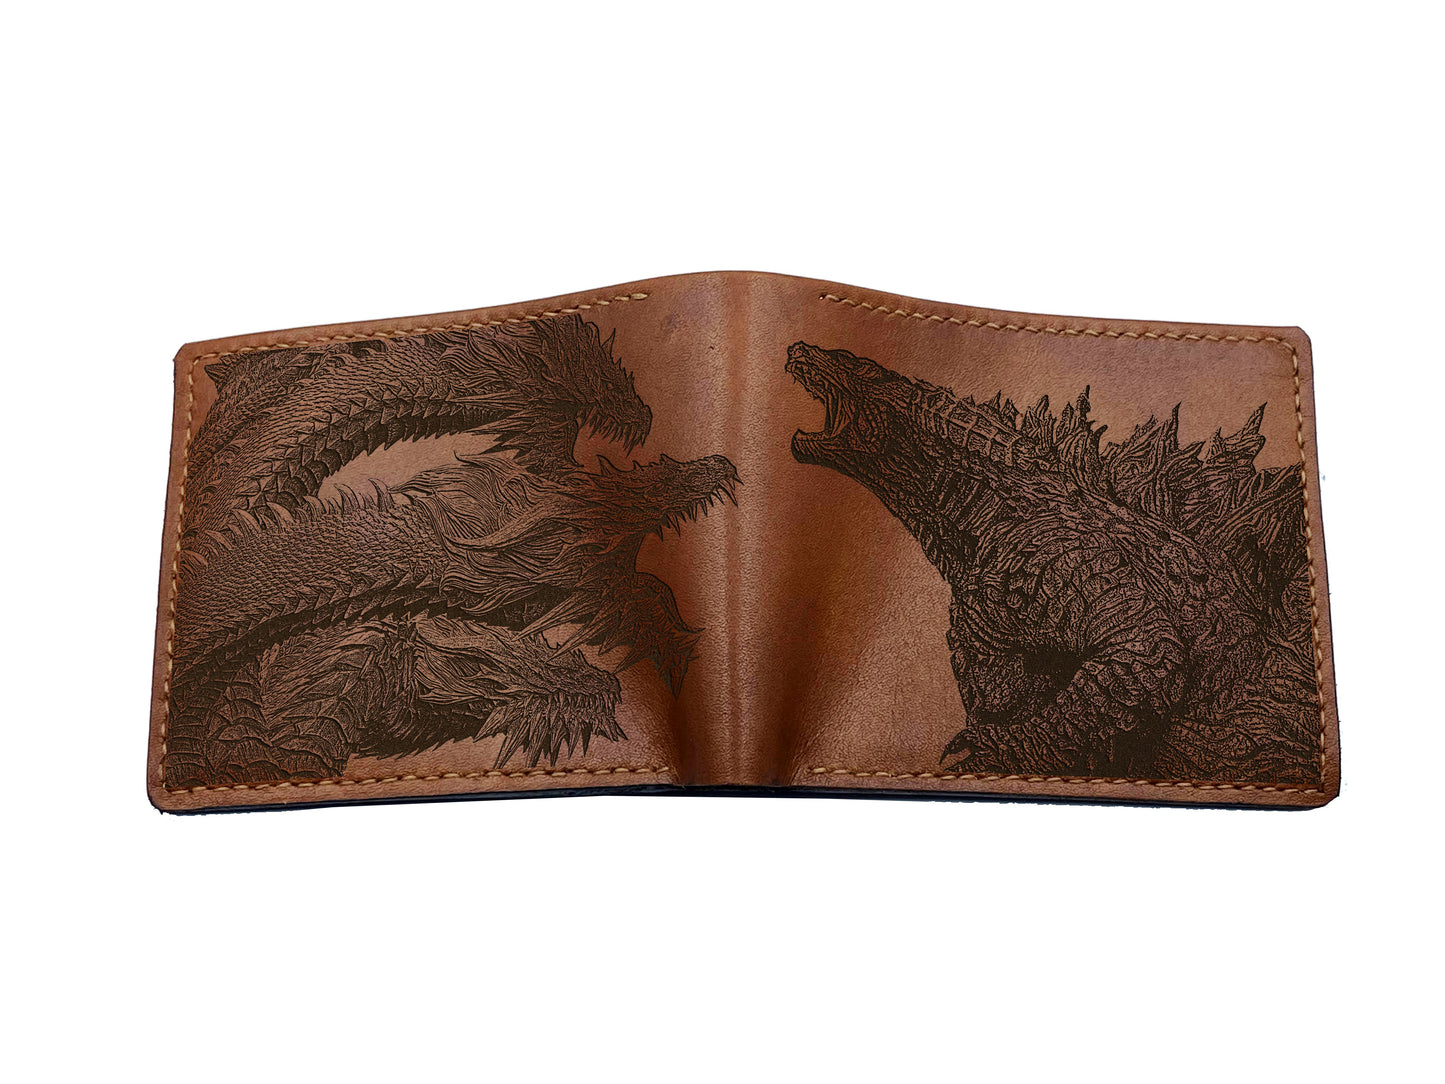 Godzilla King Ghidorah drawing leather wallet, custom engraving gift ideas, monsters art wallet, gift for brother, husband, monsterverse present